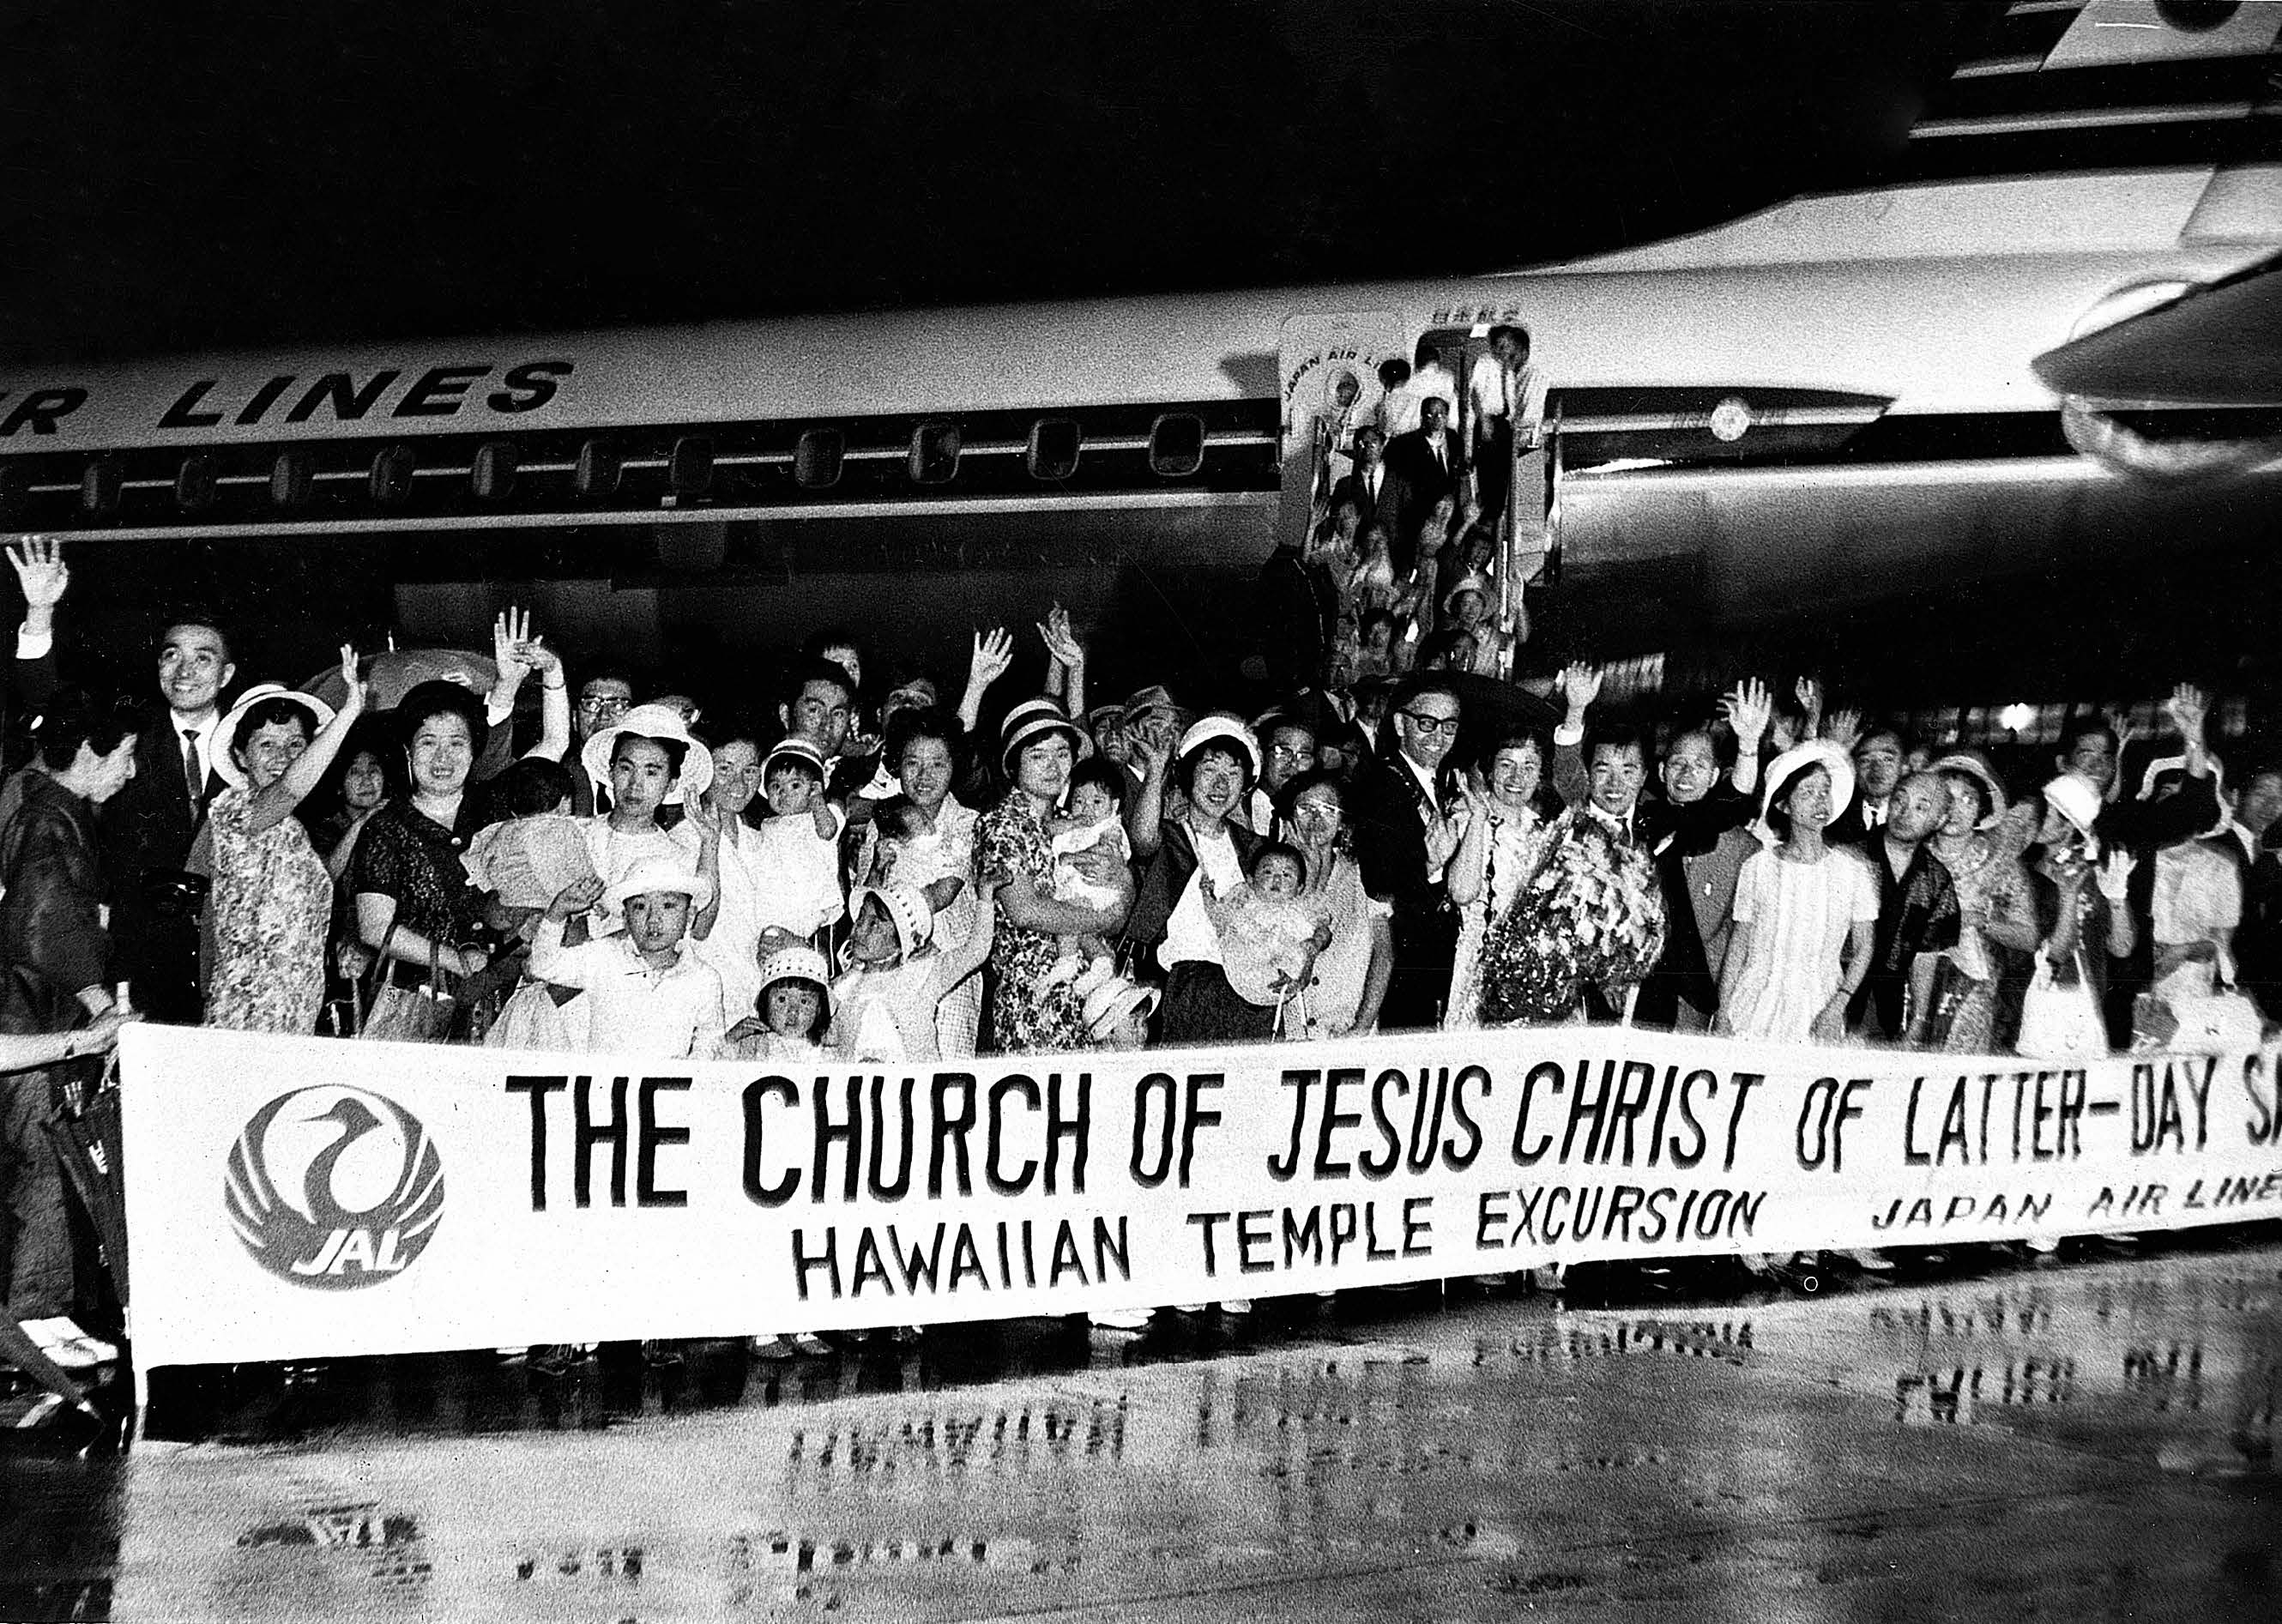 The Japanese Saints landed in Honolulu on 22 July 1965. “The arrival and reception of our saints in Hawaii was breathtaking,” recalled mission president Dwayne Andersen. Courtesy of Masahisa Watabe.